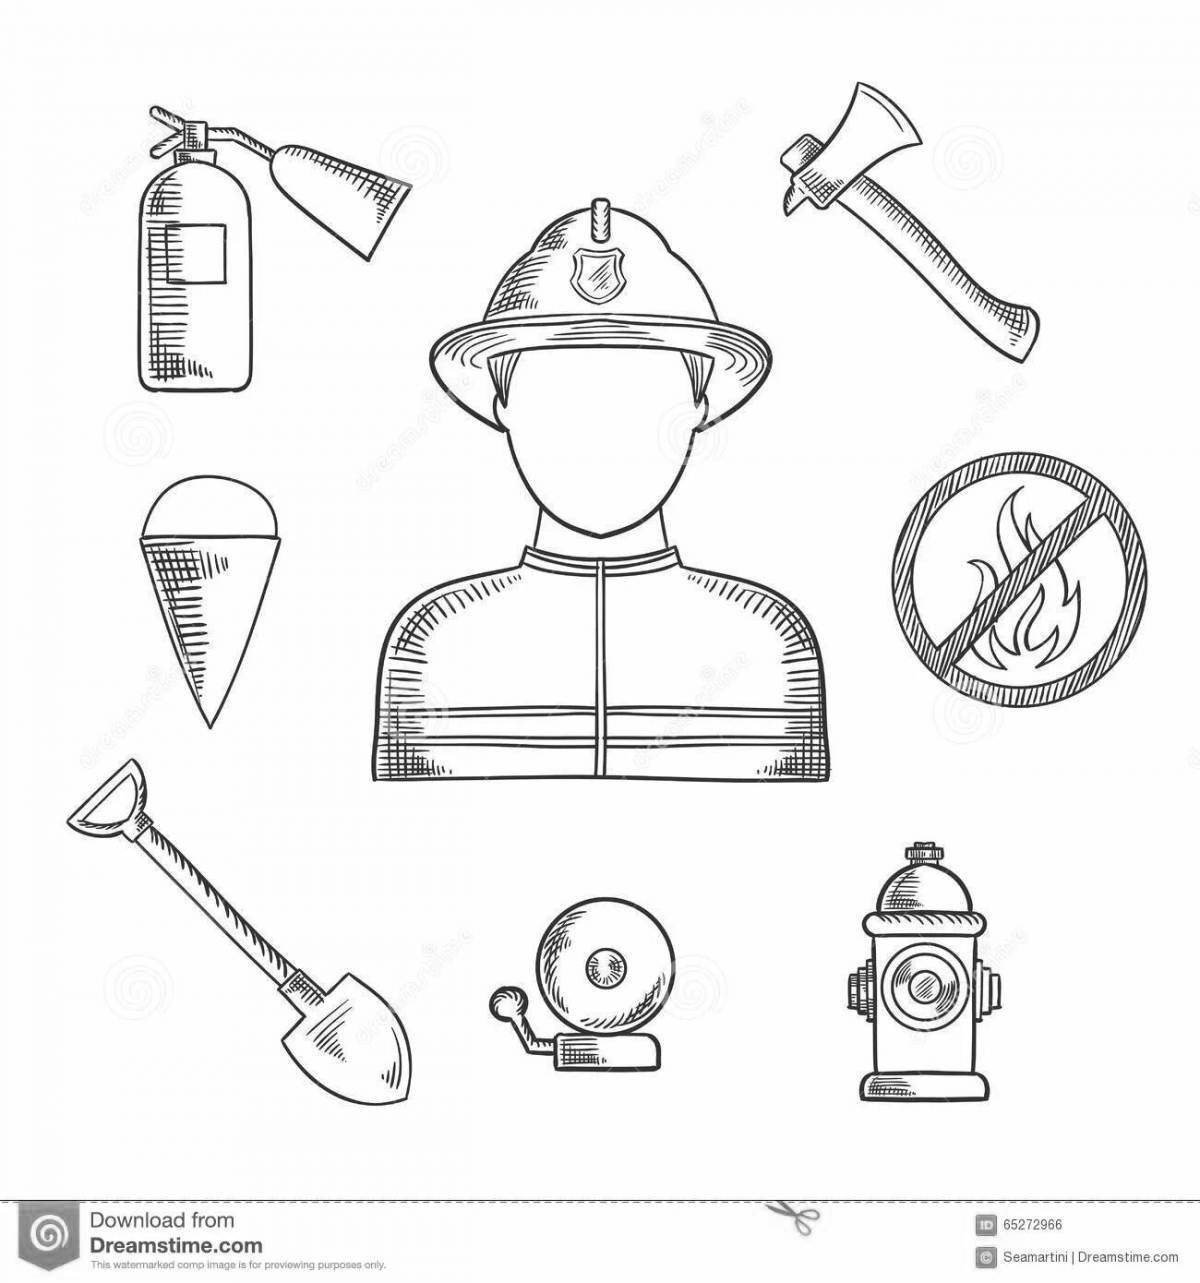 Tempting fire shield coloring page for kids